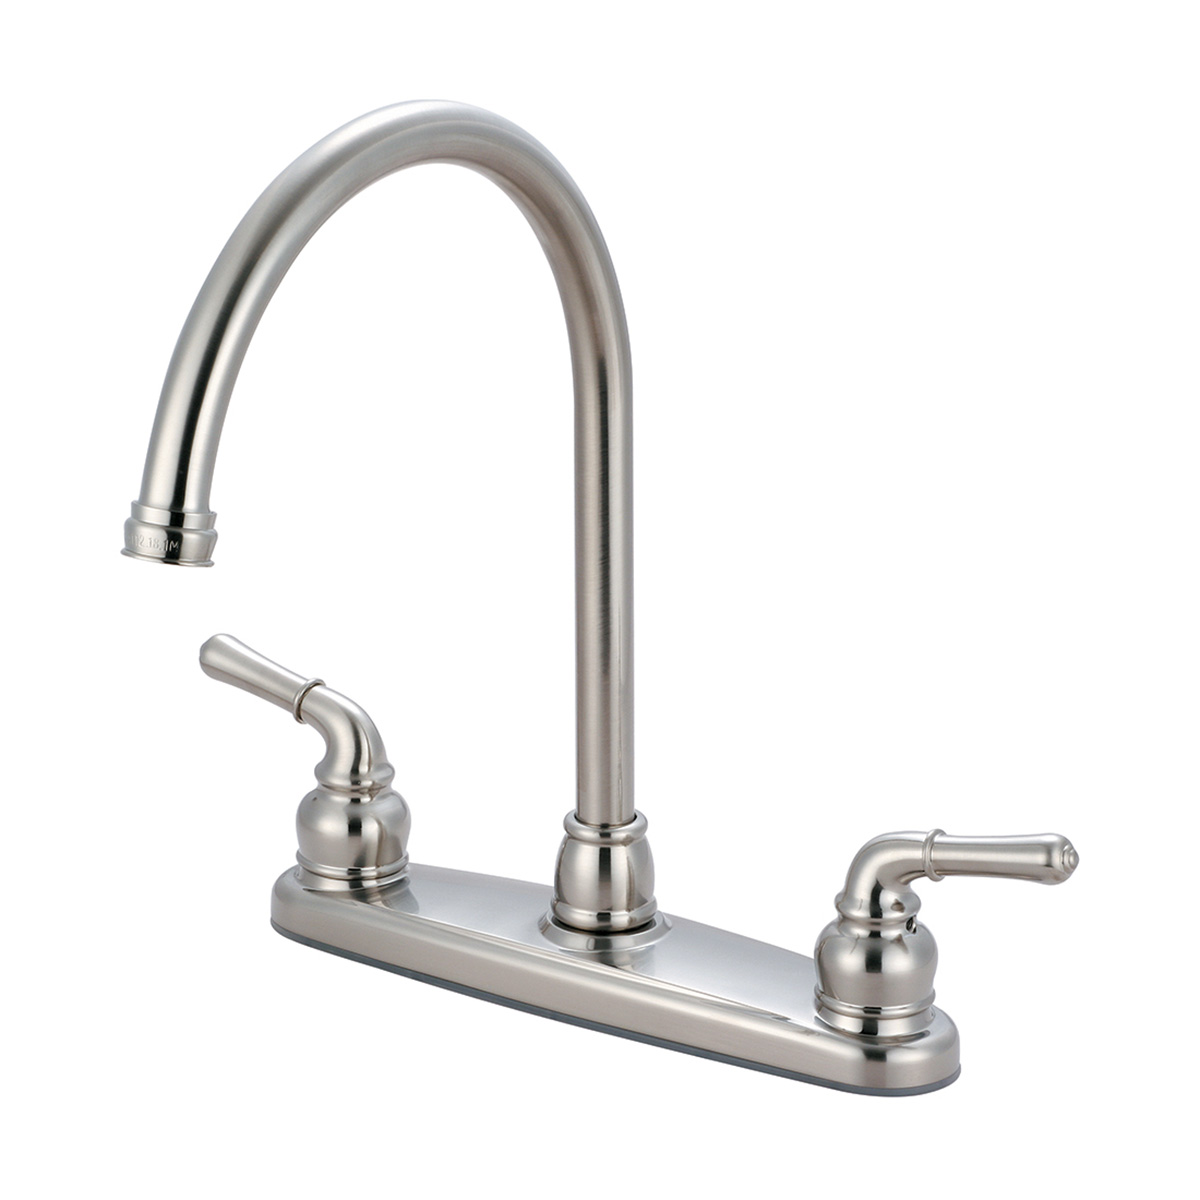 Picture of Accent K-5340-BN Two Handle Kitchen Faucet - Brushed Nickel